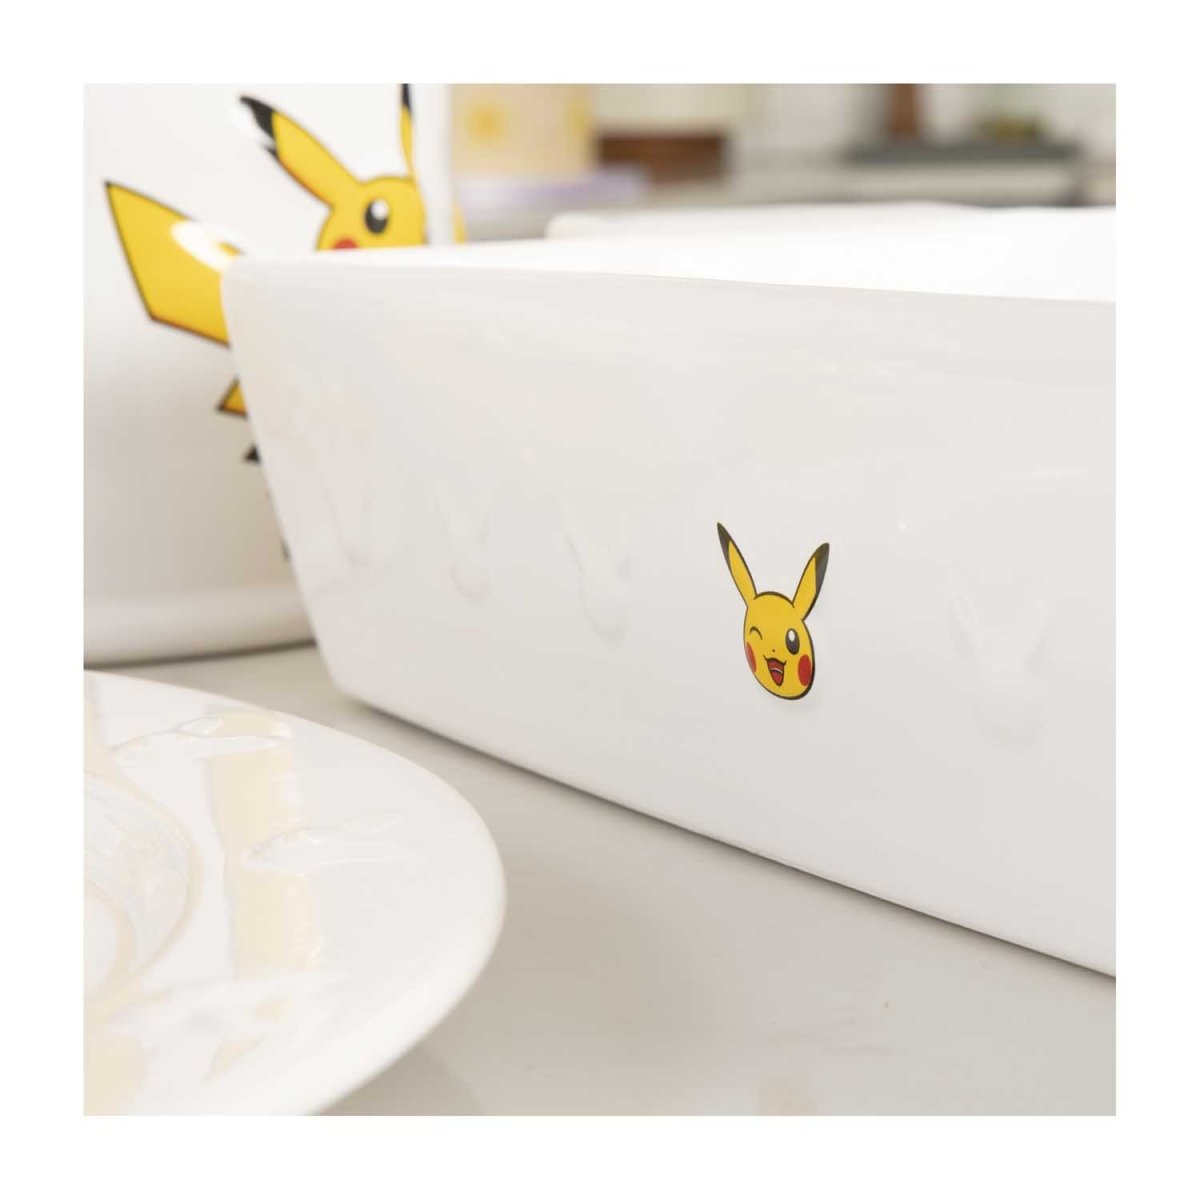 Pikachu Kitchen collection, featuring a Pikachu-shaped butter dish, now  available at Pokémon Center